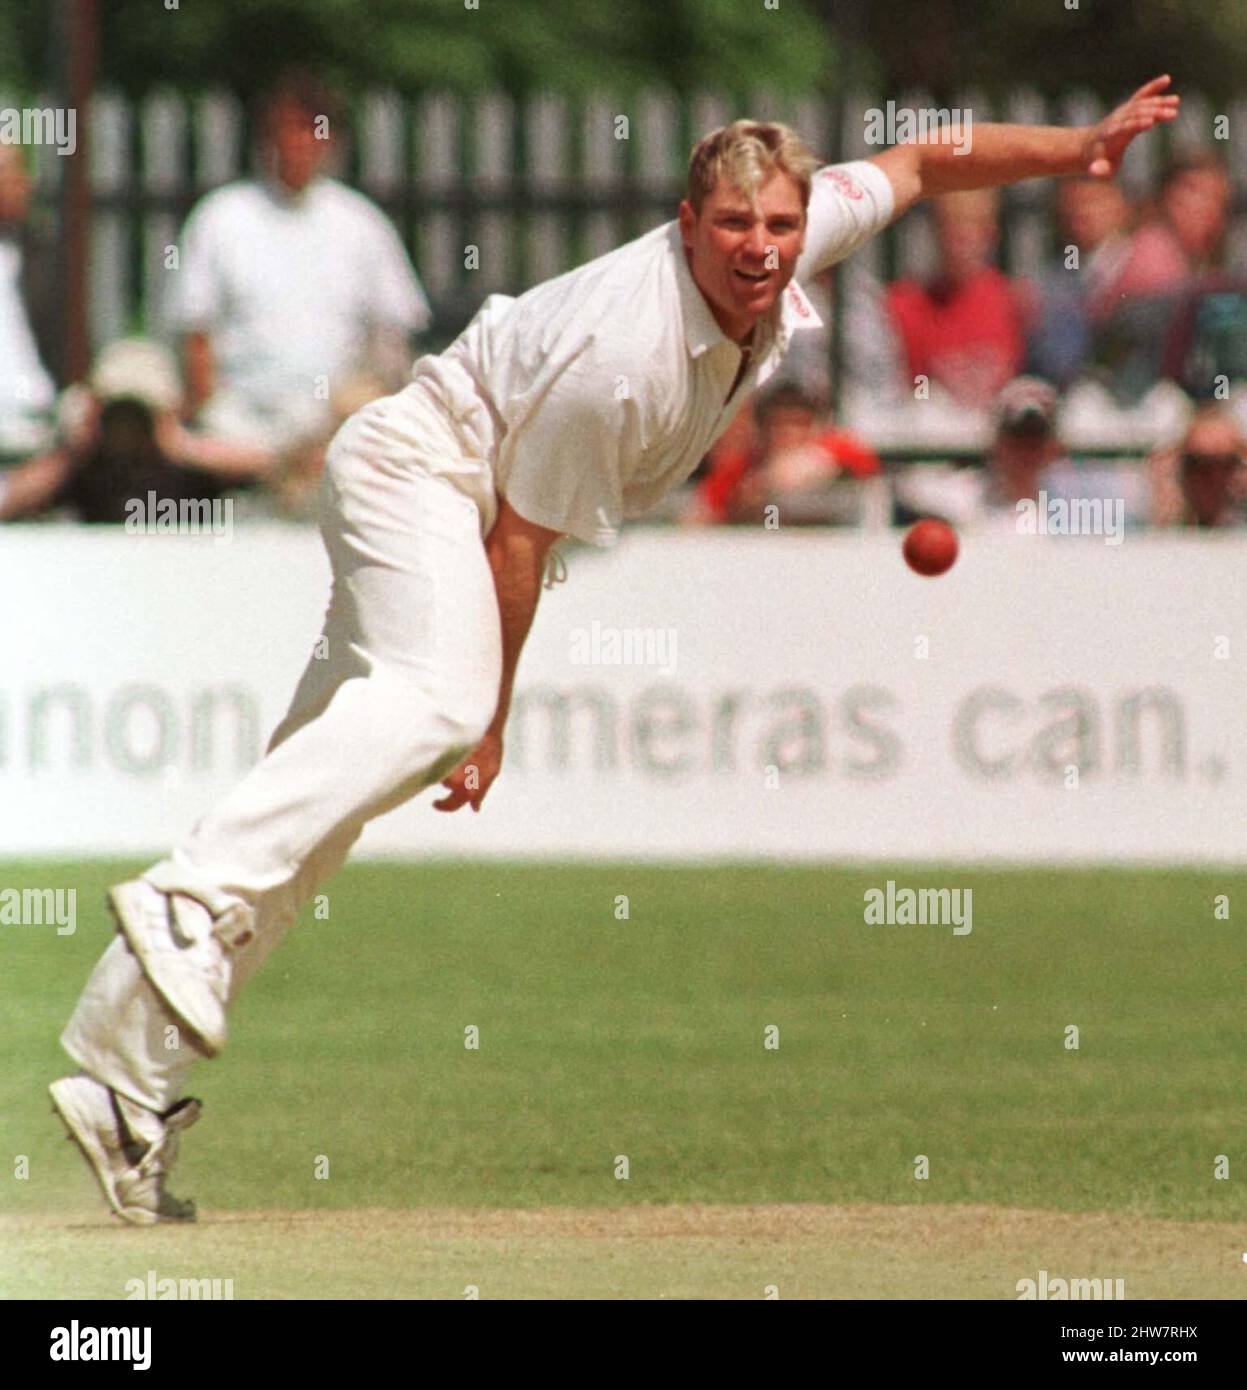 File photo dated 28-05-1997 of Australia's Shane Warne in action during the Tetley Bitter Challenge match against Gloucestershire in Bristol. Former Australia cricketer Shane Warne has died at the age of 52, his management company MPC Entertainment has announced in a statement. Issue date: Friday March 4, 2022. Stock Photo